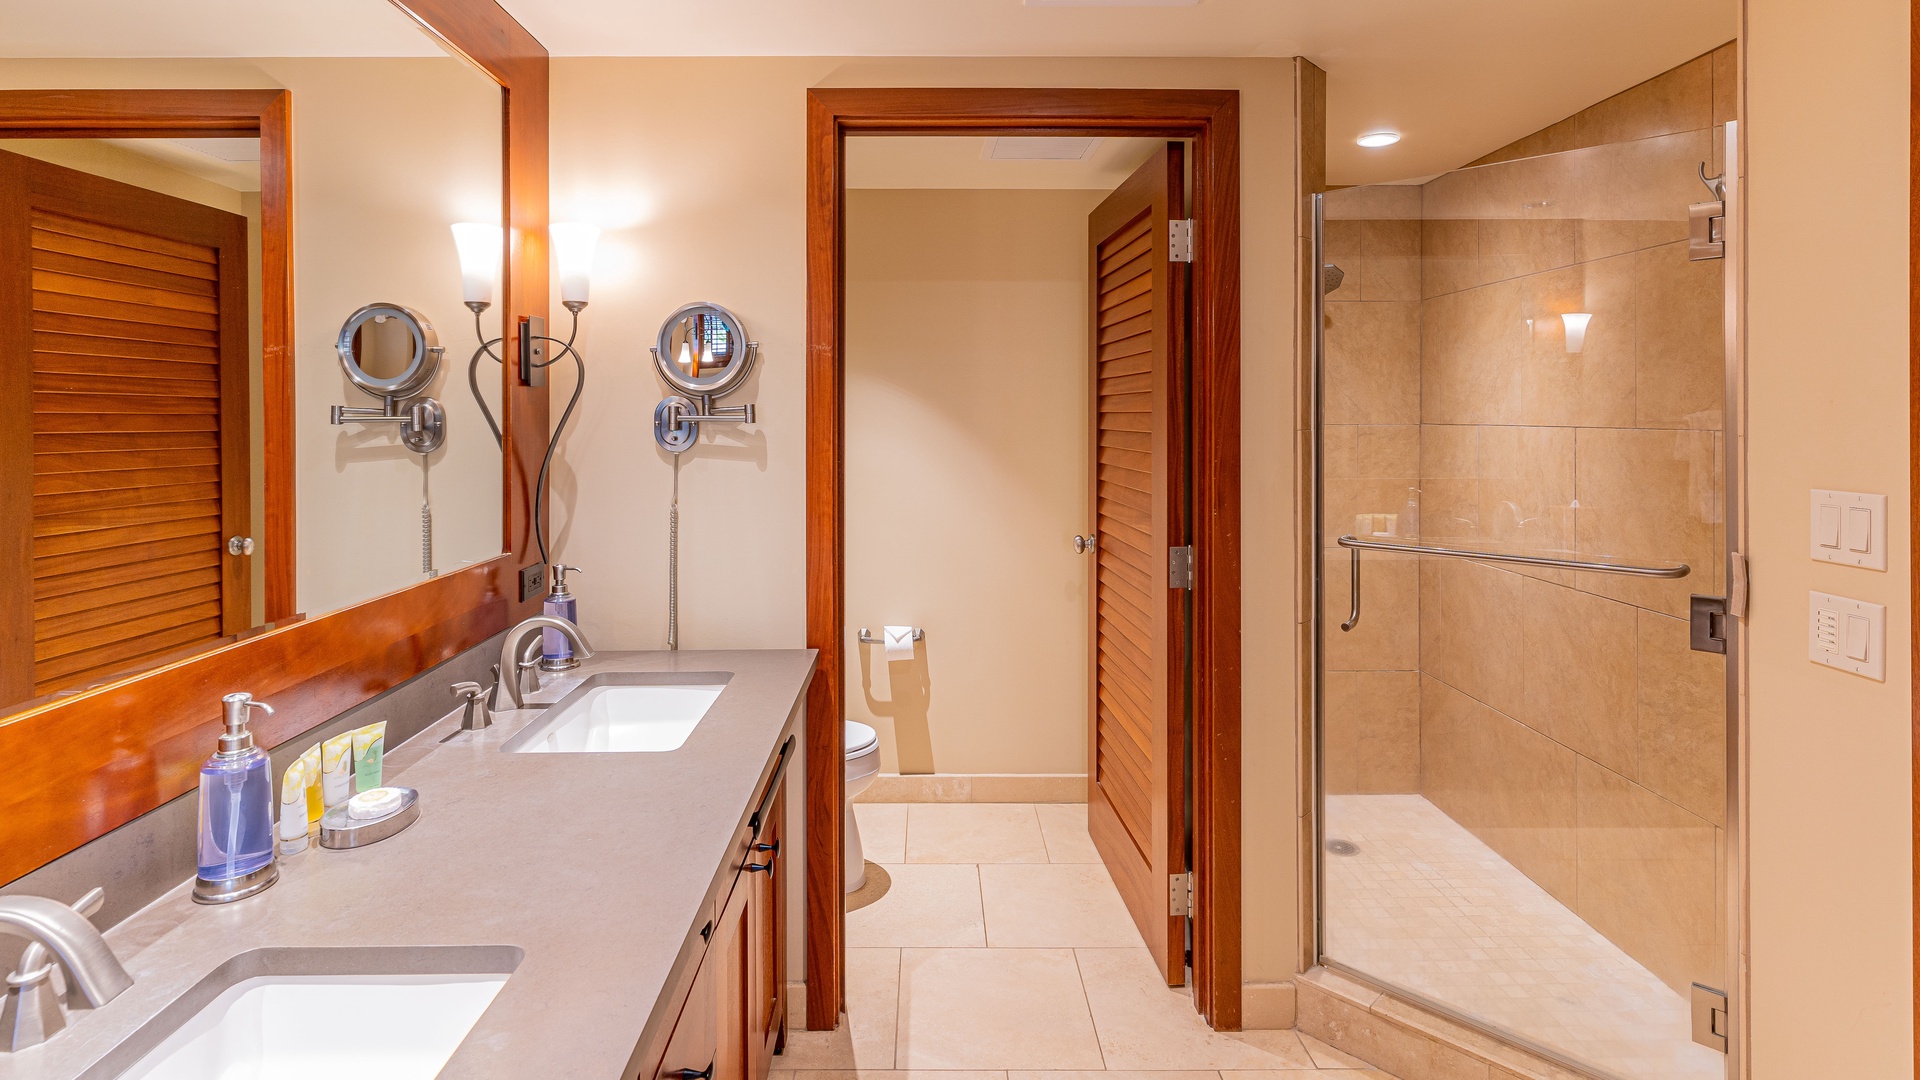 Kapolei Vacation Rentals, Ko Olina Beach Villas O224 - The primary guest bathroom with a walk-in shower and double vanity.